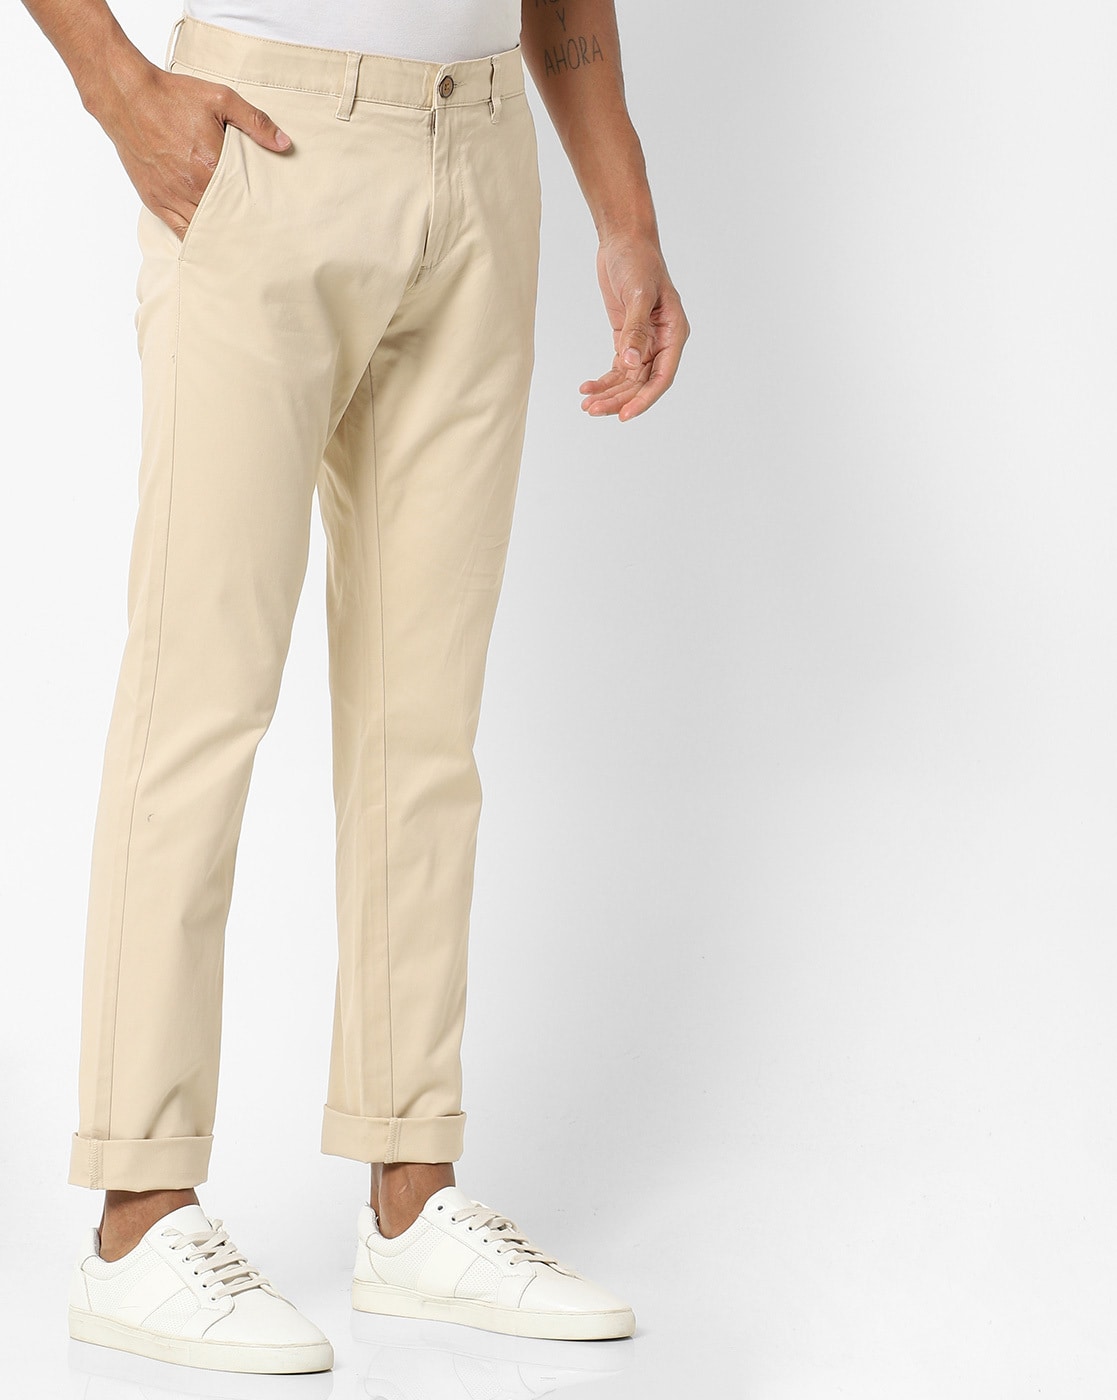 NETPLAY Striped Slim Fit Flat-Front Trousers|BDF Shopping